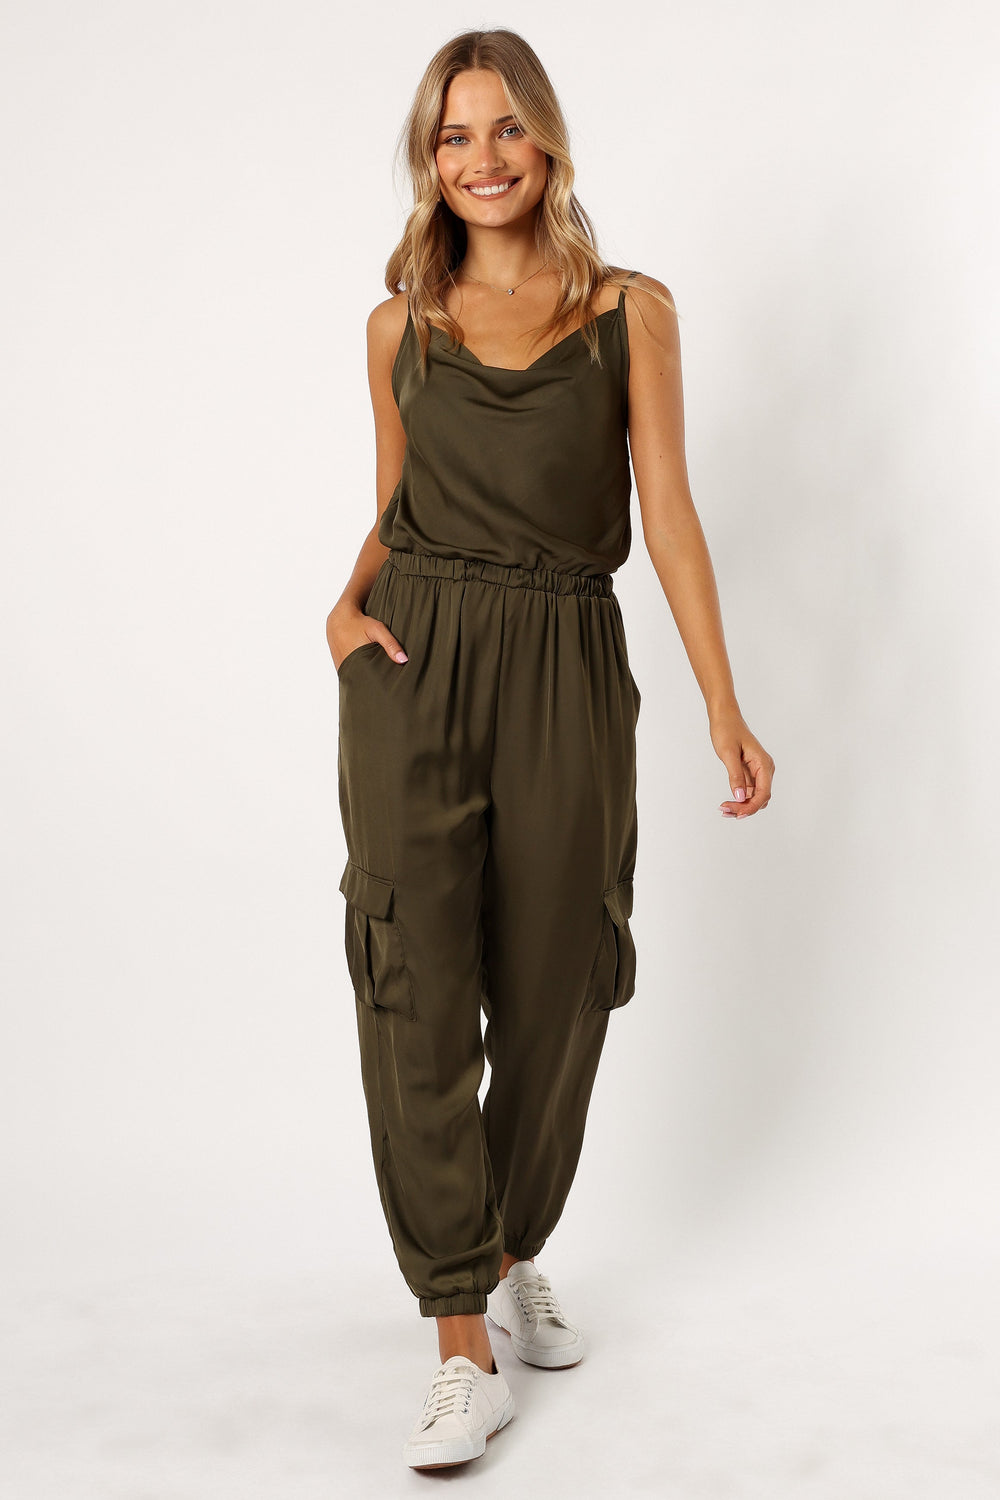 Petal and Pup USA Rompers Jasleen Jumpsuit - Olive